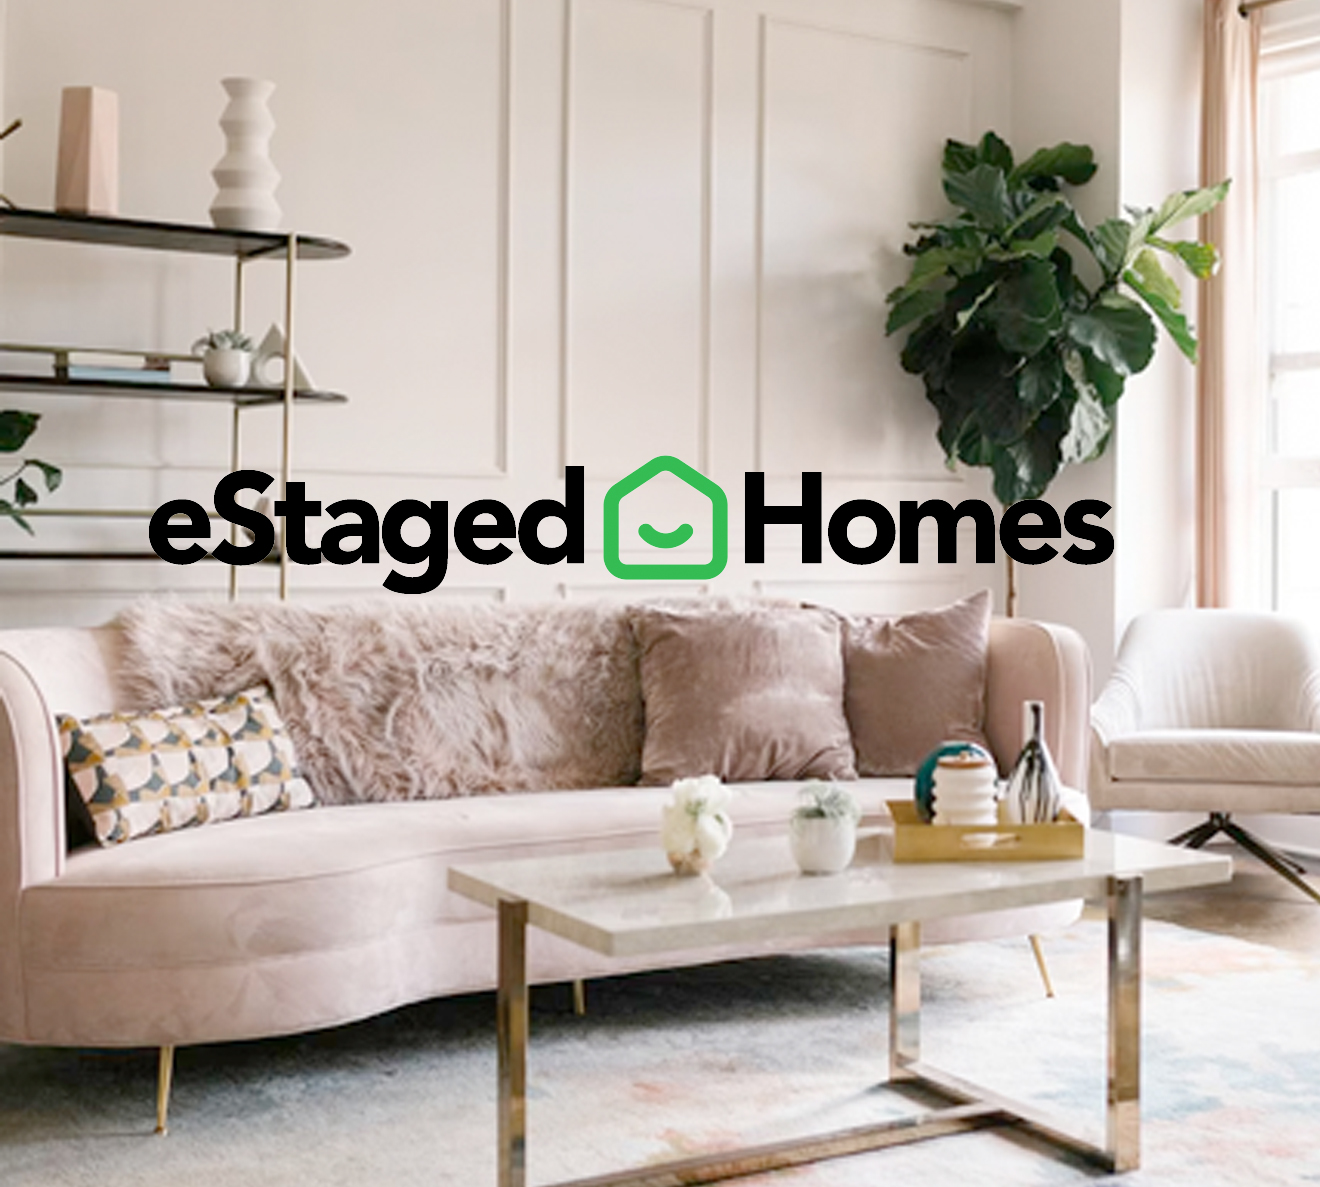 eStaged Homes - An Online Home Staging Company That Will Get You Top-Dollar For Your Home